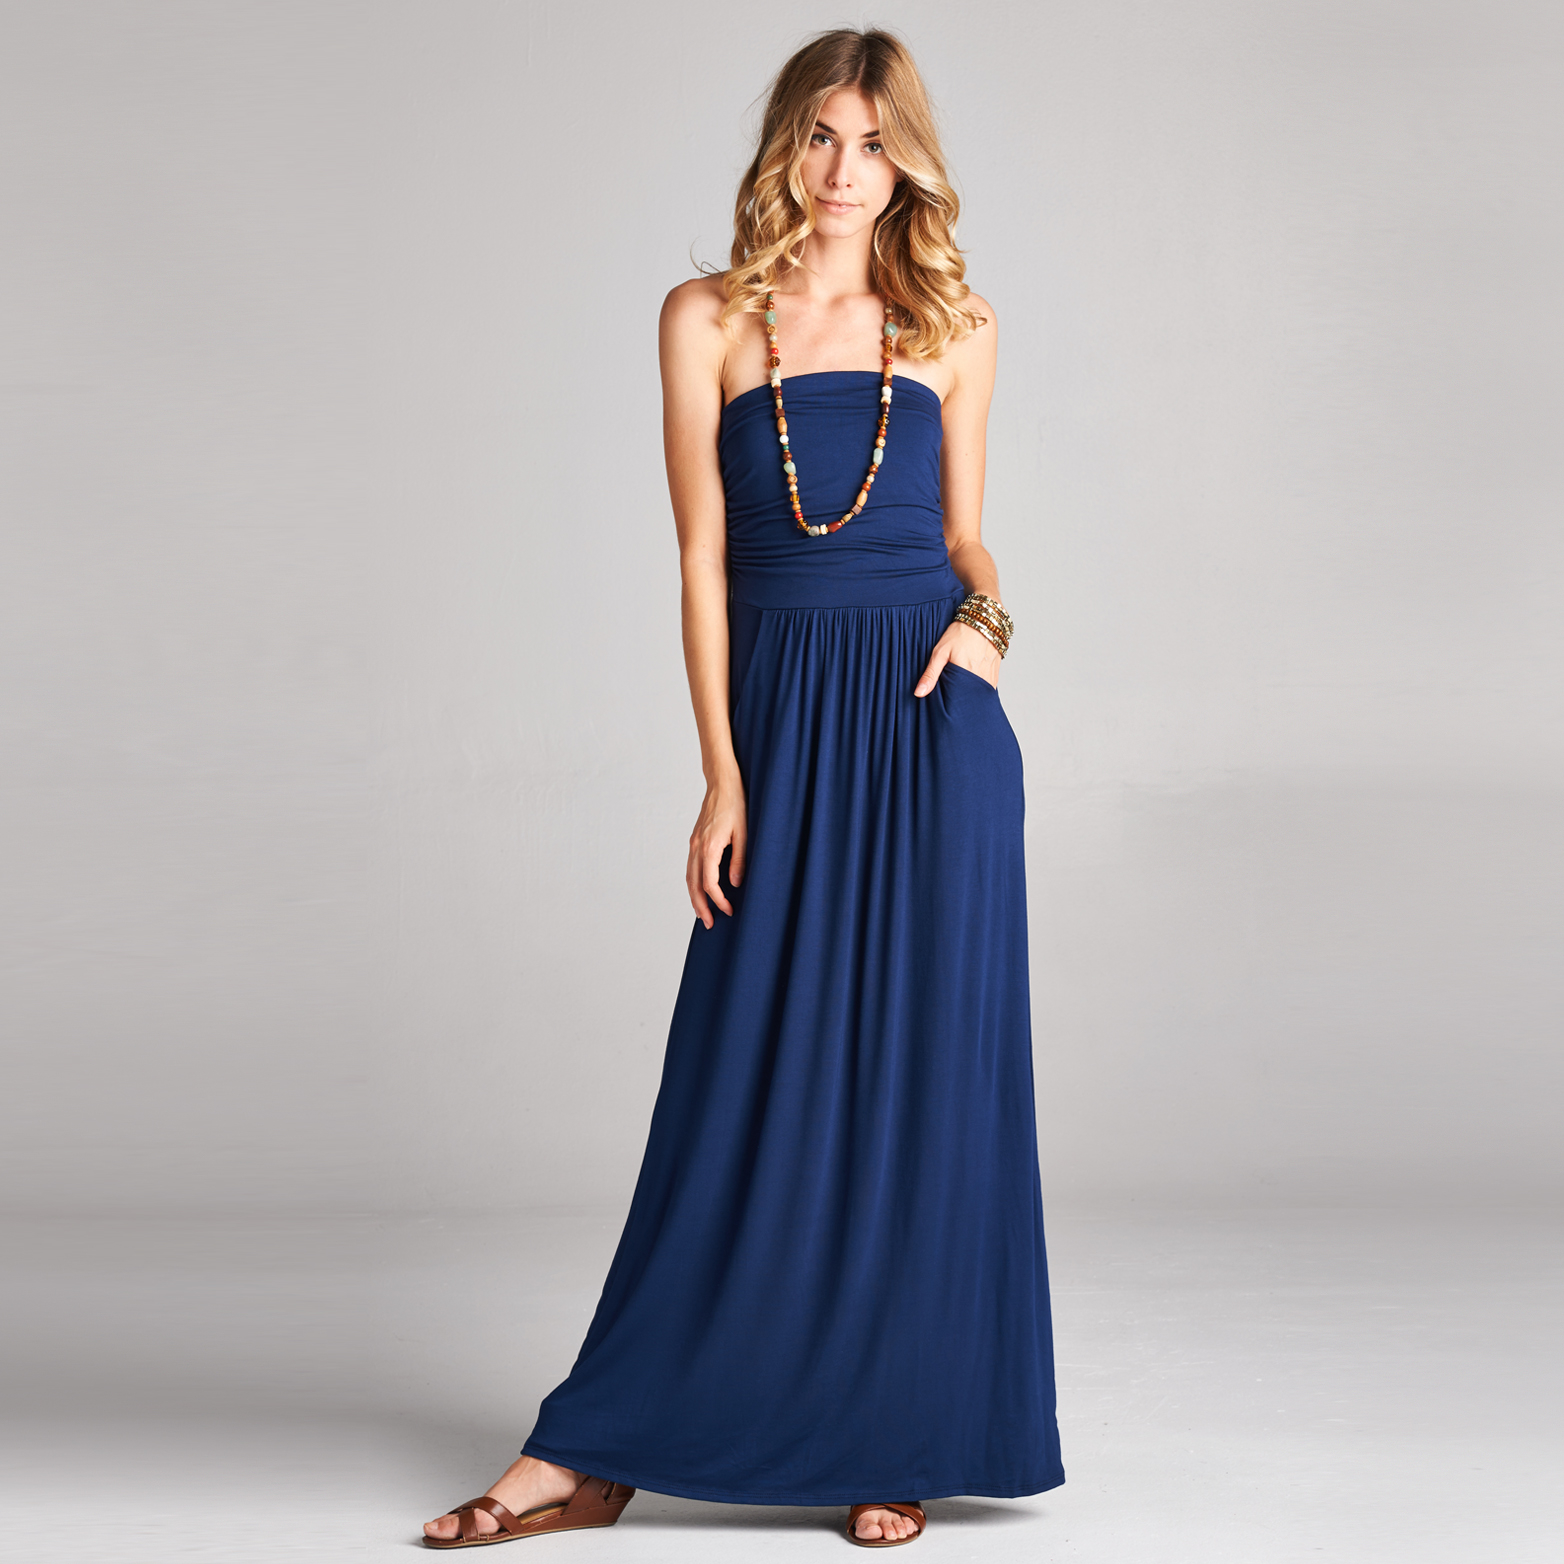 Atlantis Strapless Maxi Dress With Pockets In 6 Colors - Navy, Large (12-14)